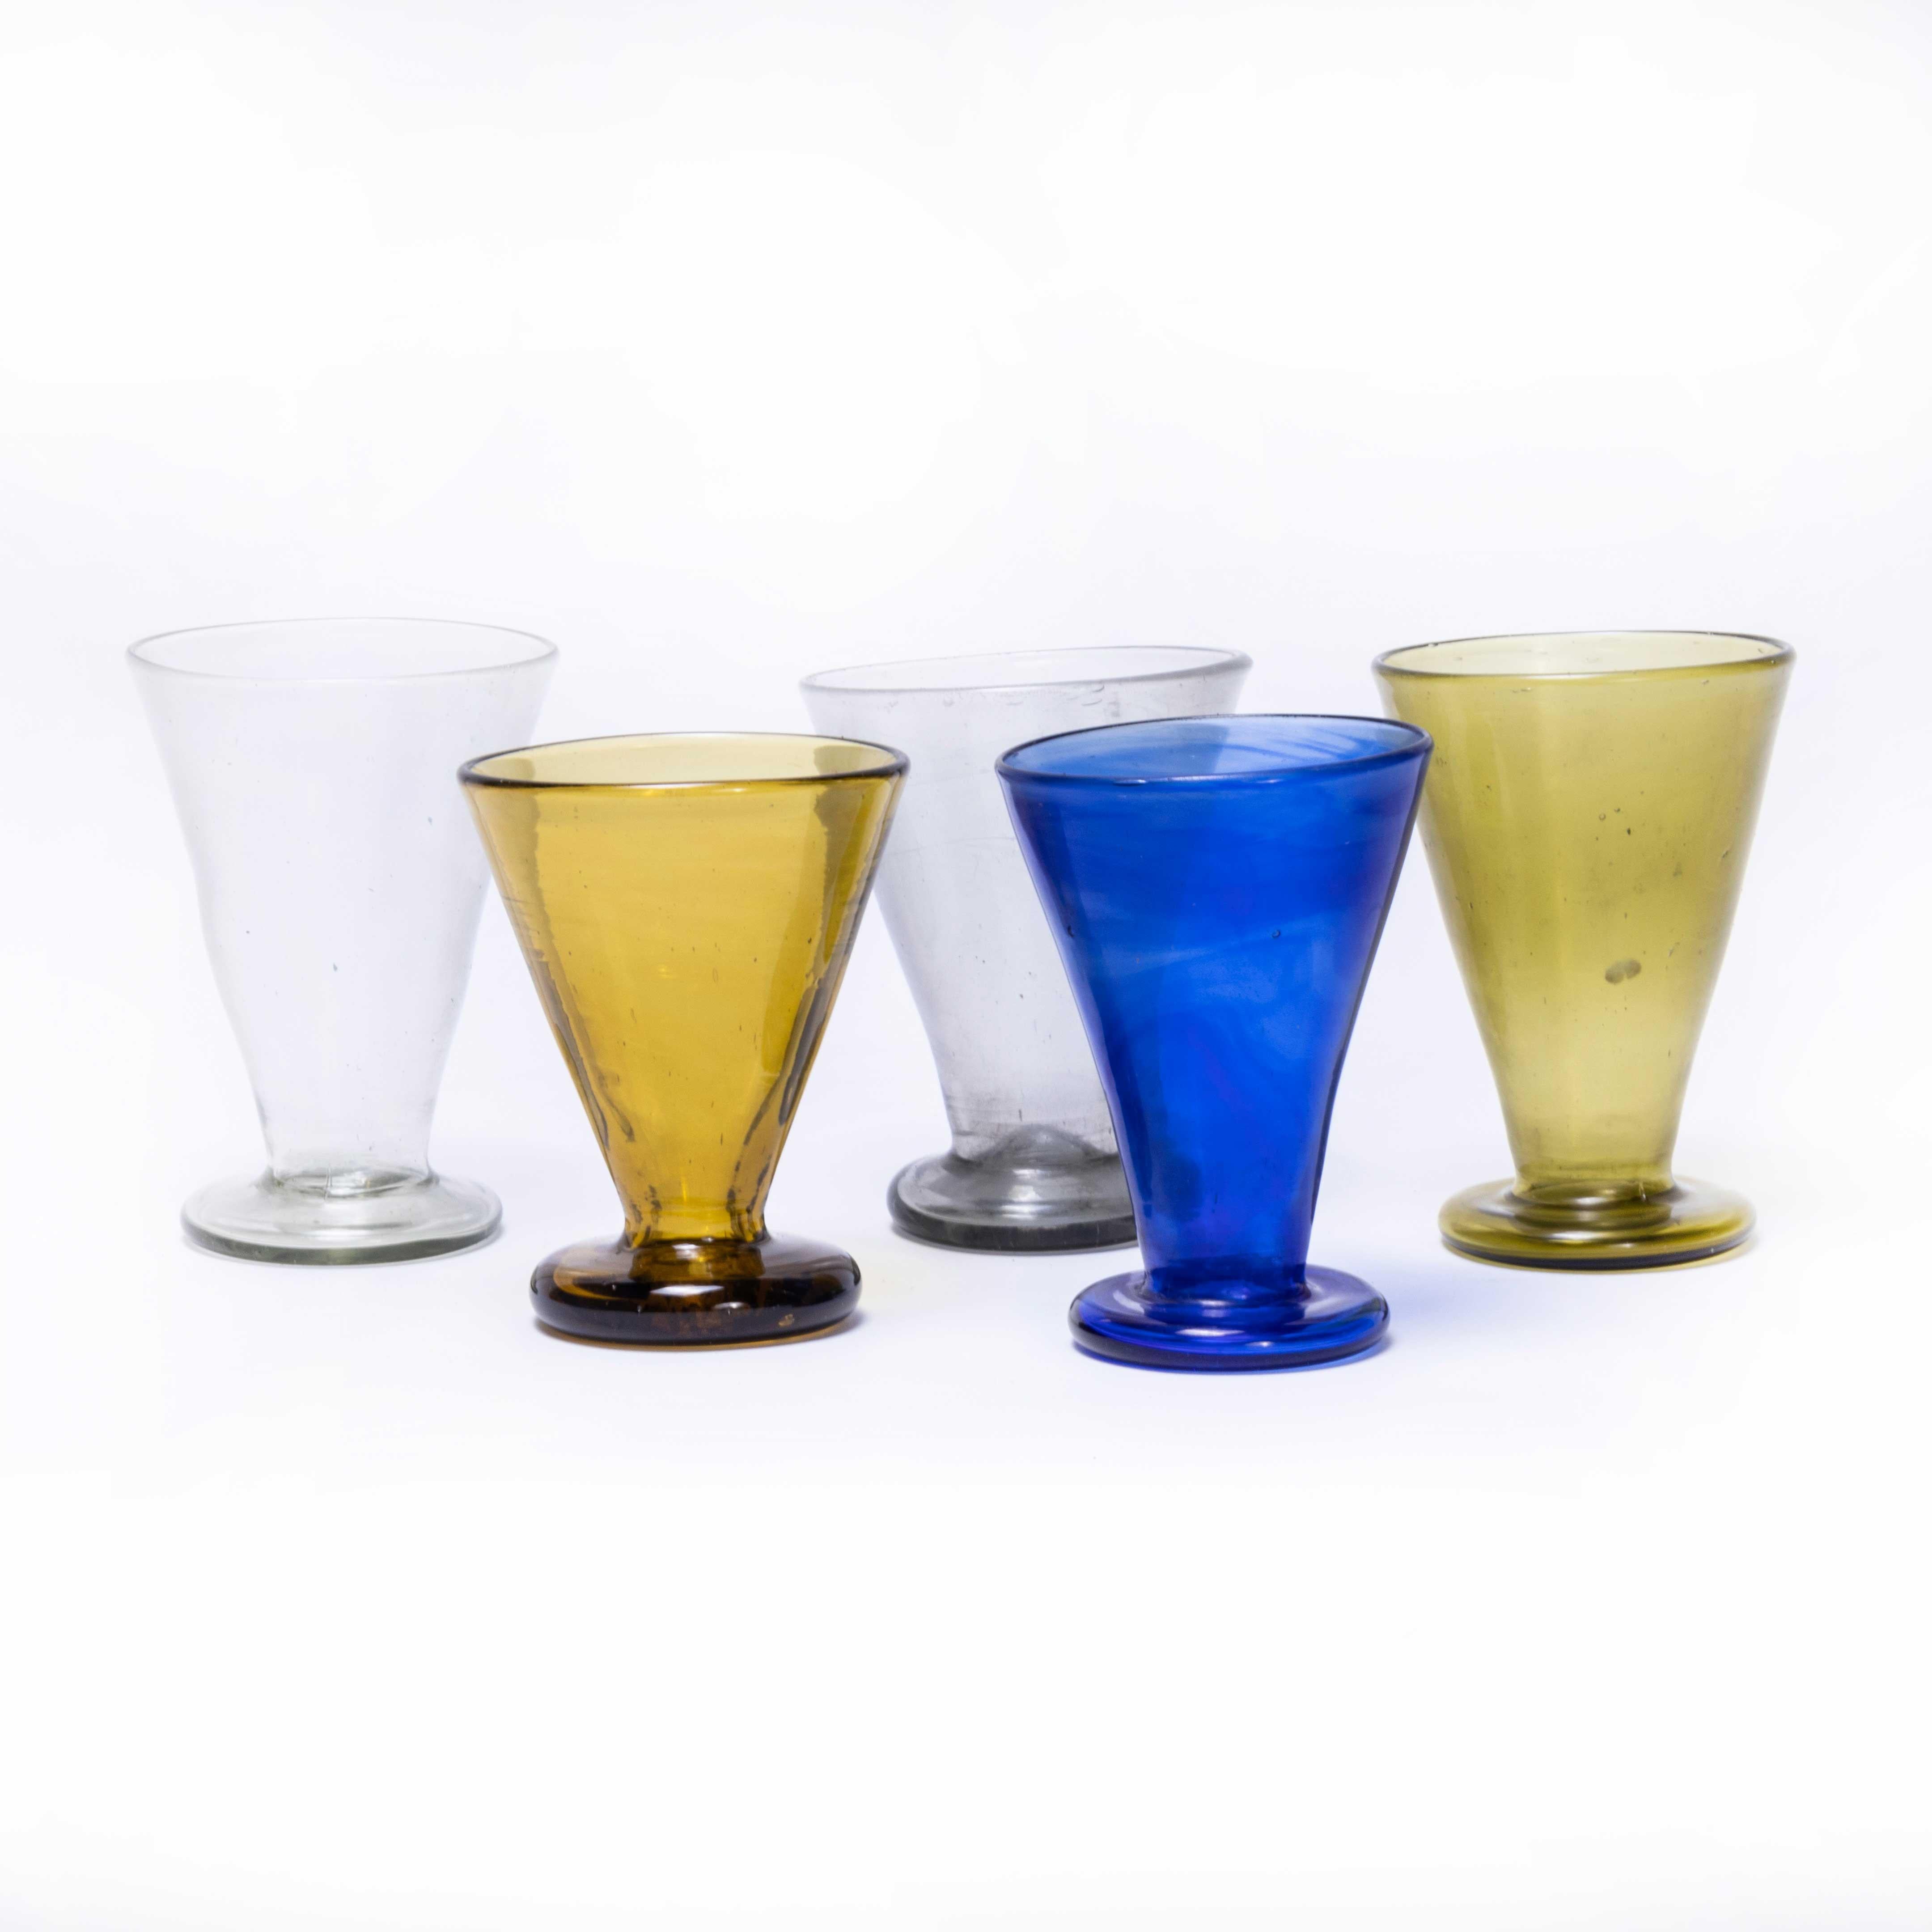 Contemporary Moroccan conical glasses – set of six
Contemporary Moroccan conical glasses – set of six. Hand-made in Morocco. The glass is mouth blown and available in a set of assorted colours as shown. The glass is mouth blown in a wonderful